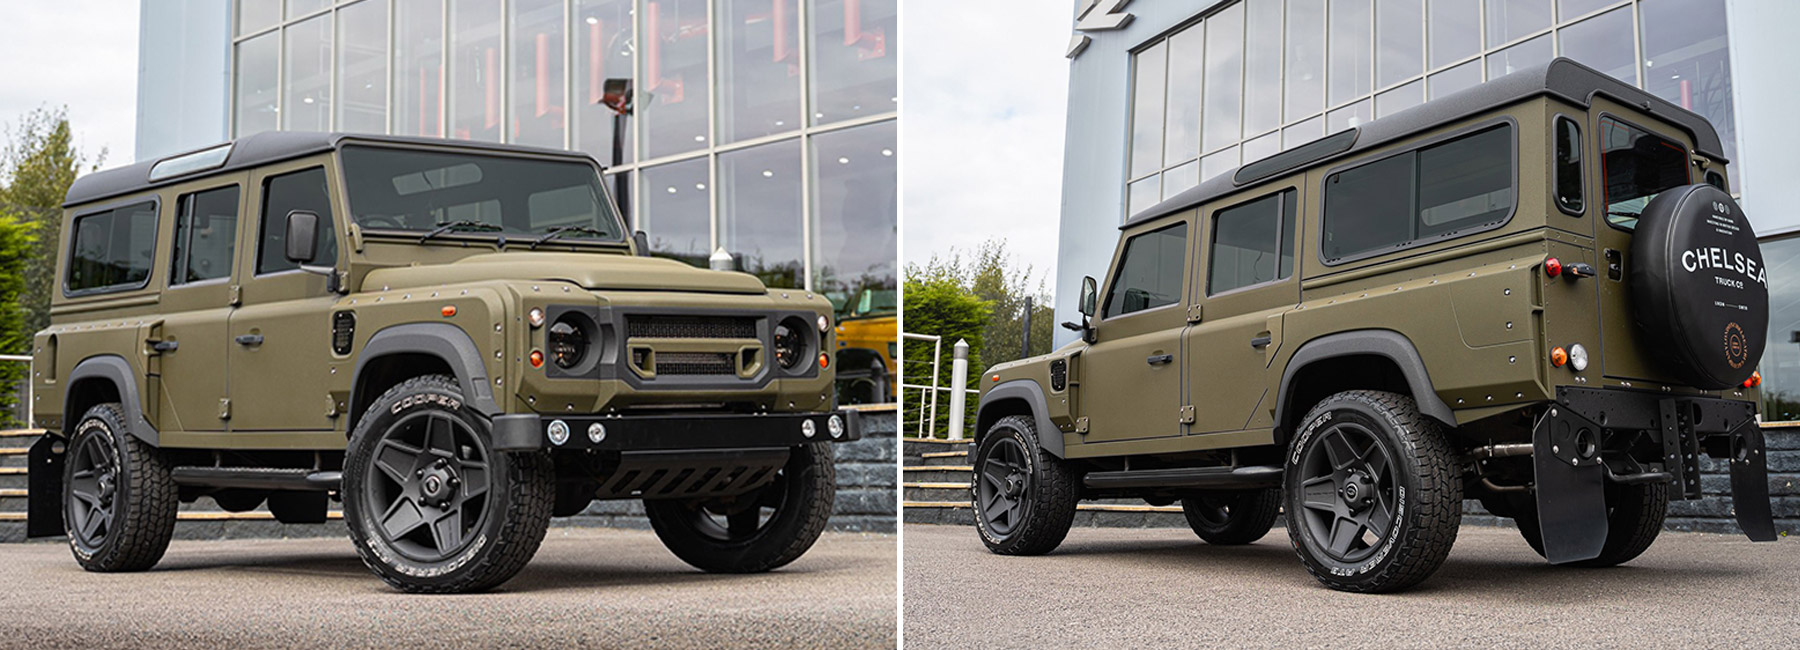 Chelsea Truck Co Unveils Muscular Adaptation Of Land